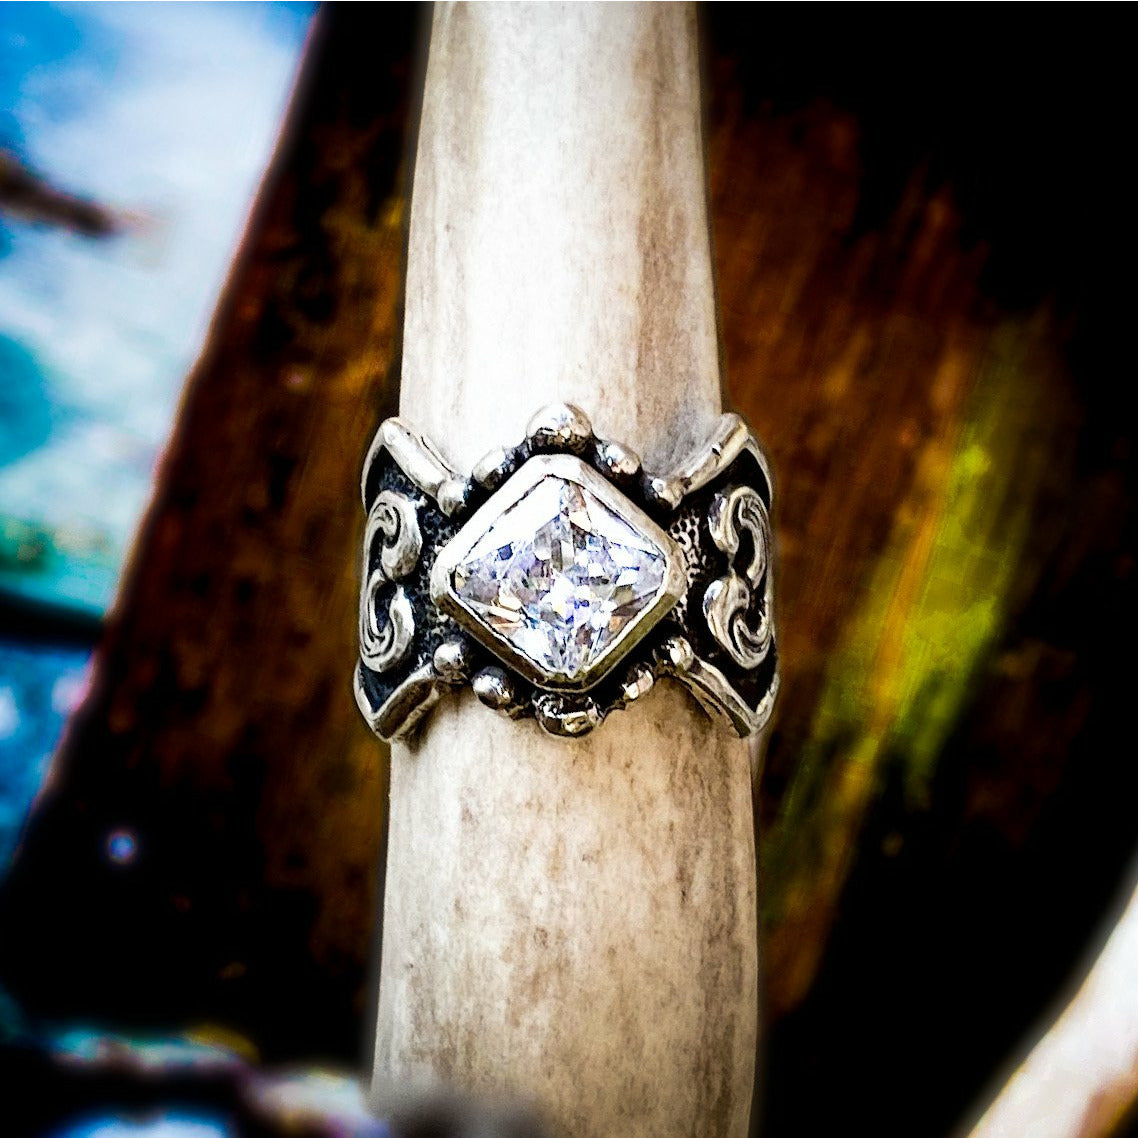 "Jolene" is a custom sterling silver ring that has a unique border surrounding an 8mm bezel set asher cut cubic zirconia mounted in the center of the ring and features a western style engraved scrolling overlay on either side of the band. 